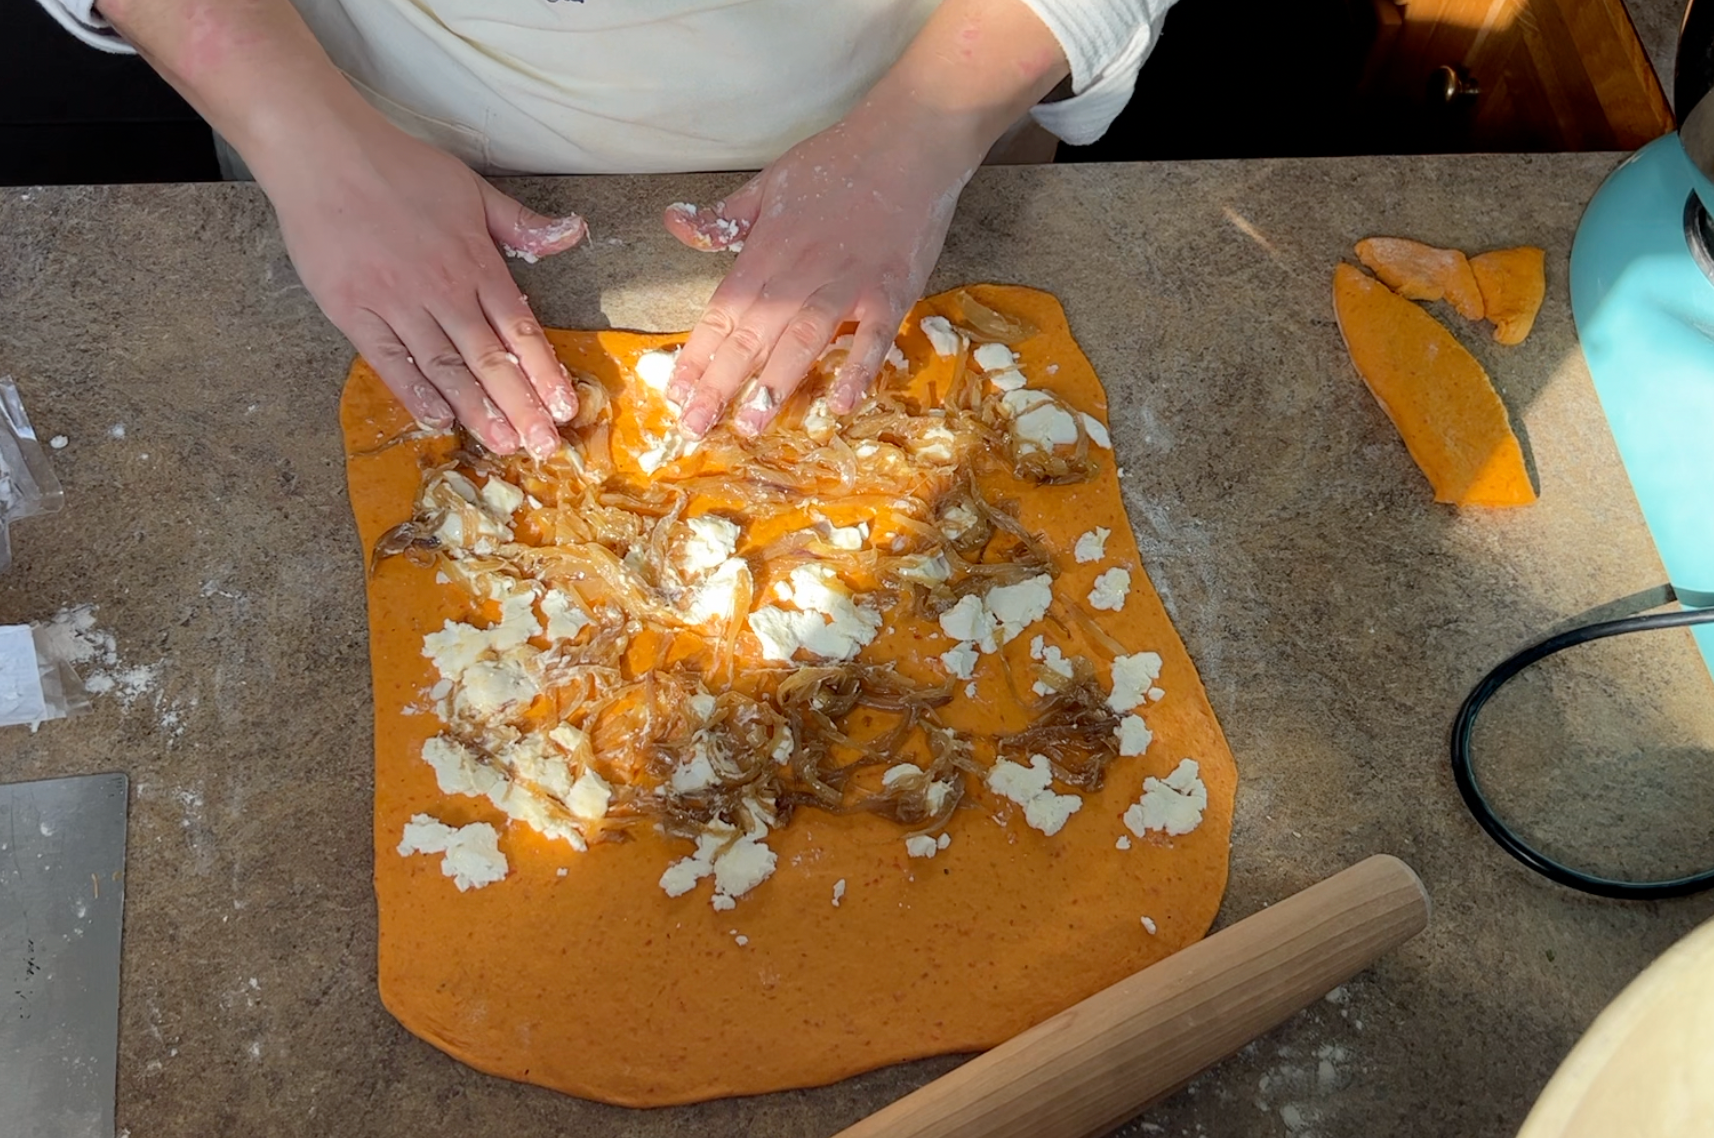 Laying goat cheese and caramelized onions onto a square of orange dough